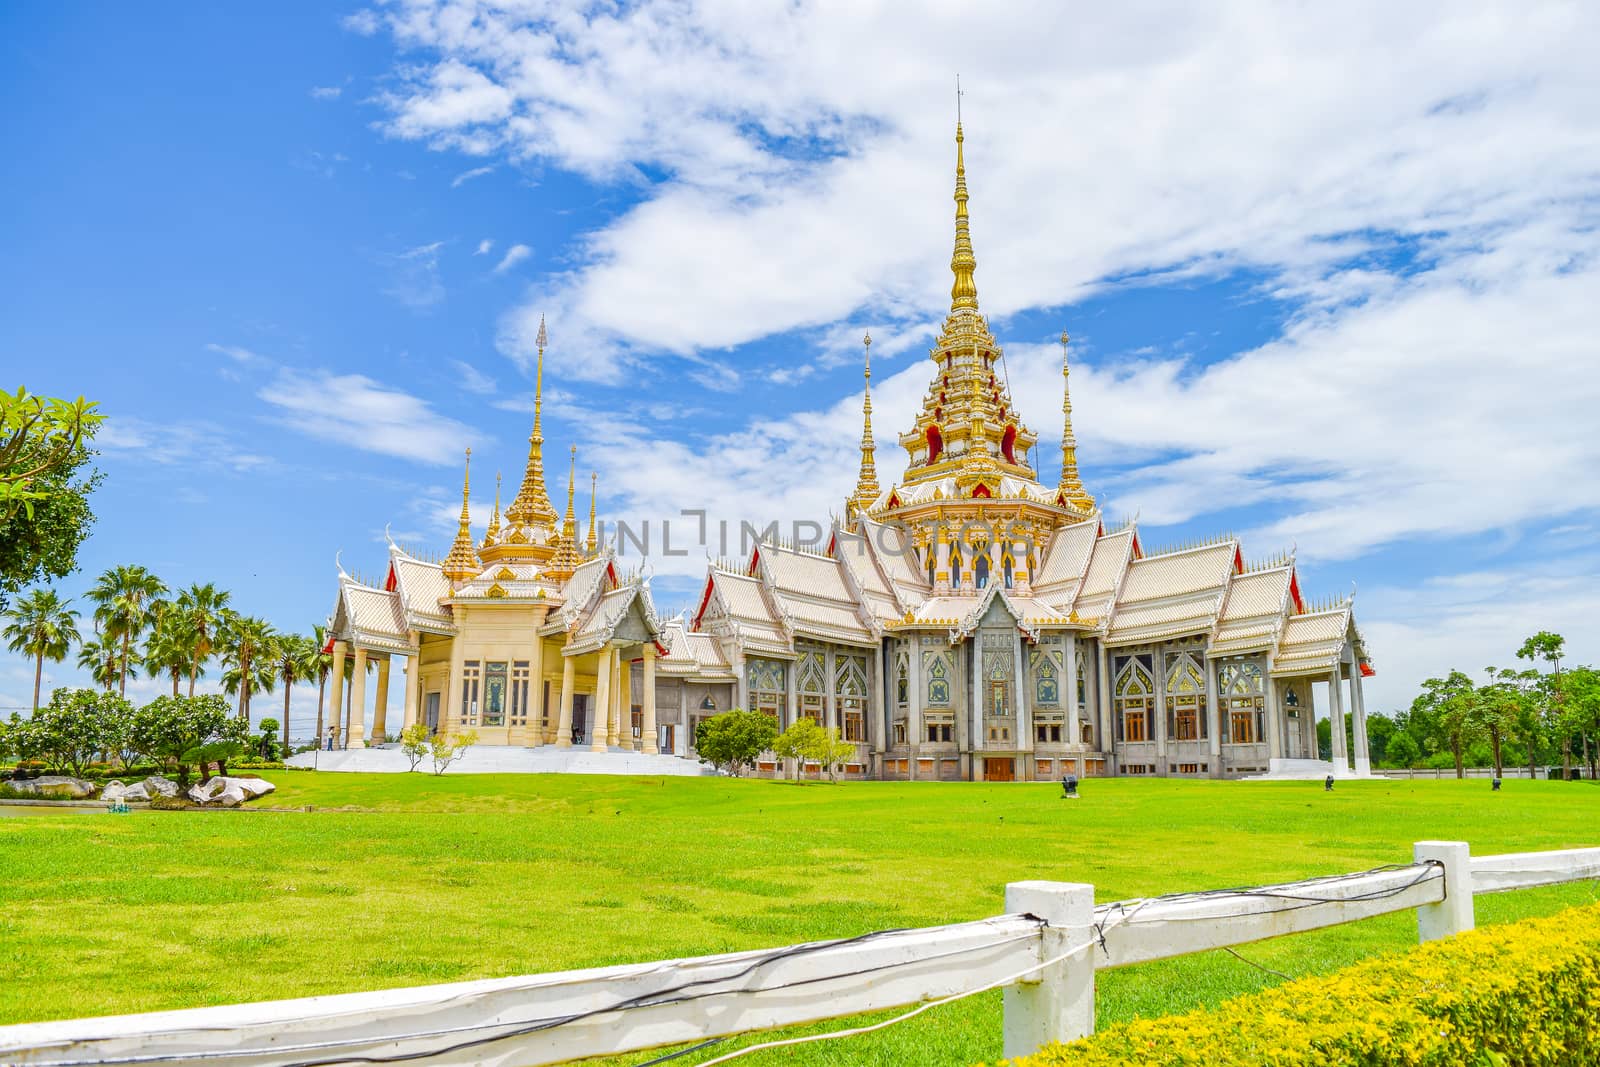 Wat Luang Pho Toh temple or Wat Non Kum temple in Nakhon Ratchasima province, Thailand (The public anyone access)